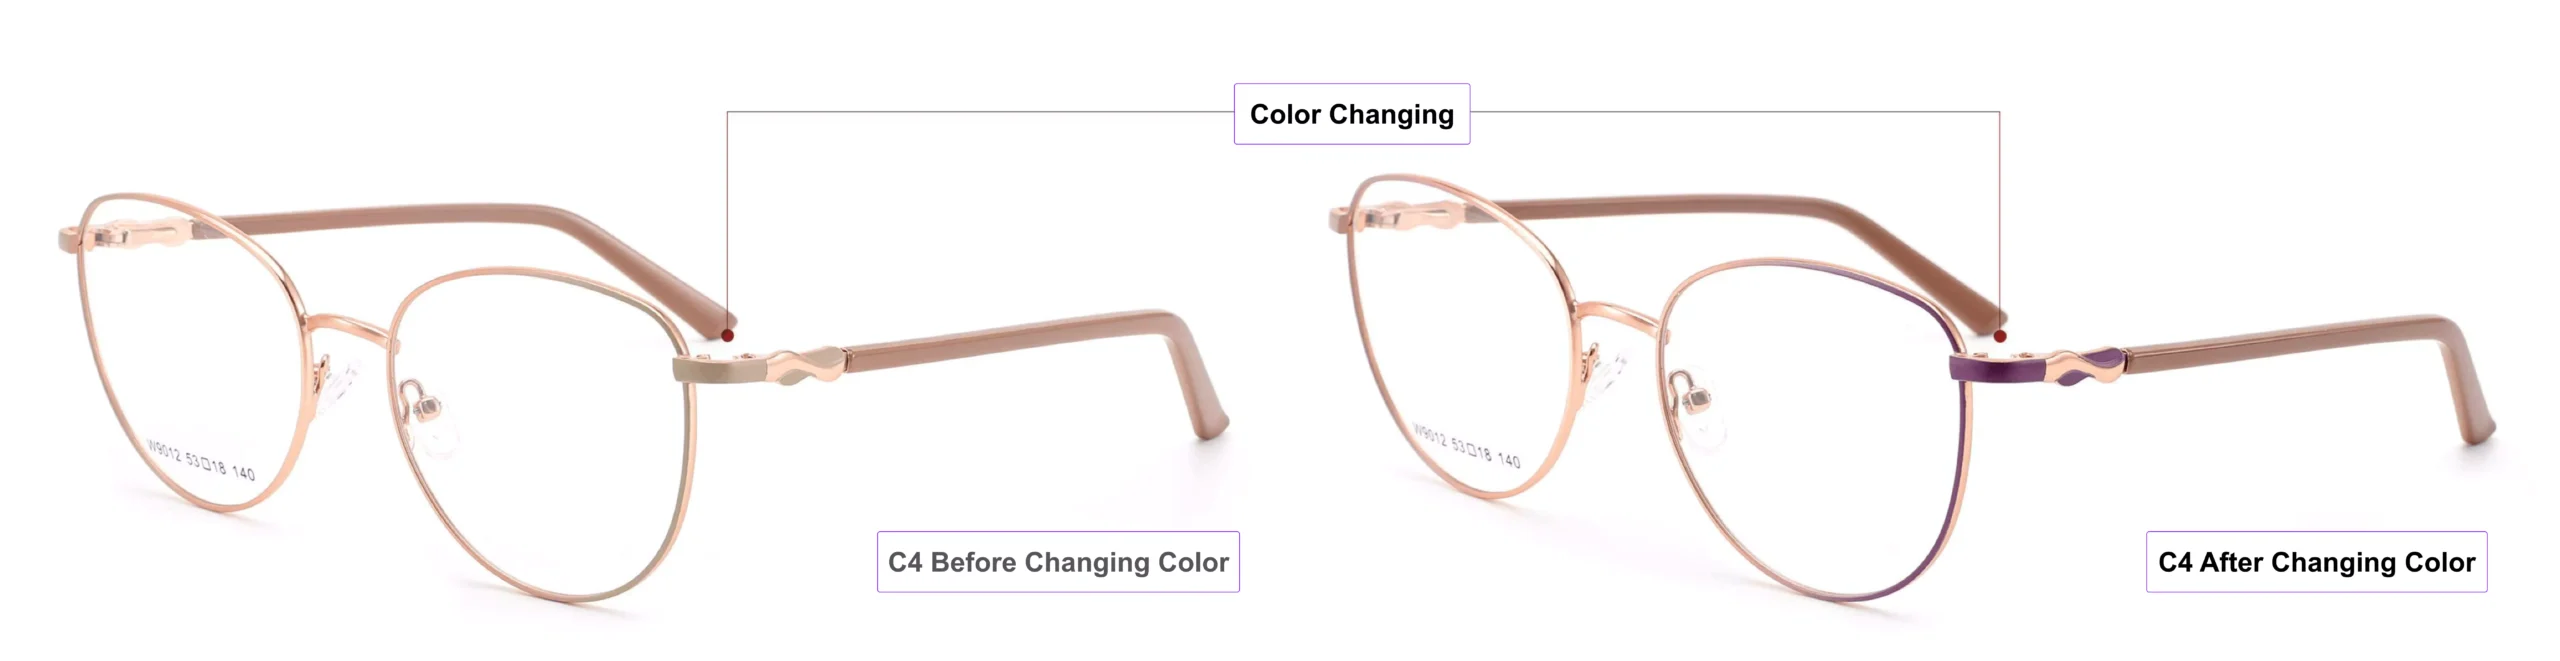 Color Changing Glasses Frames, brown, khaki, purple, gold, process of glasses color changing